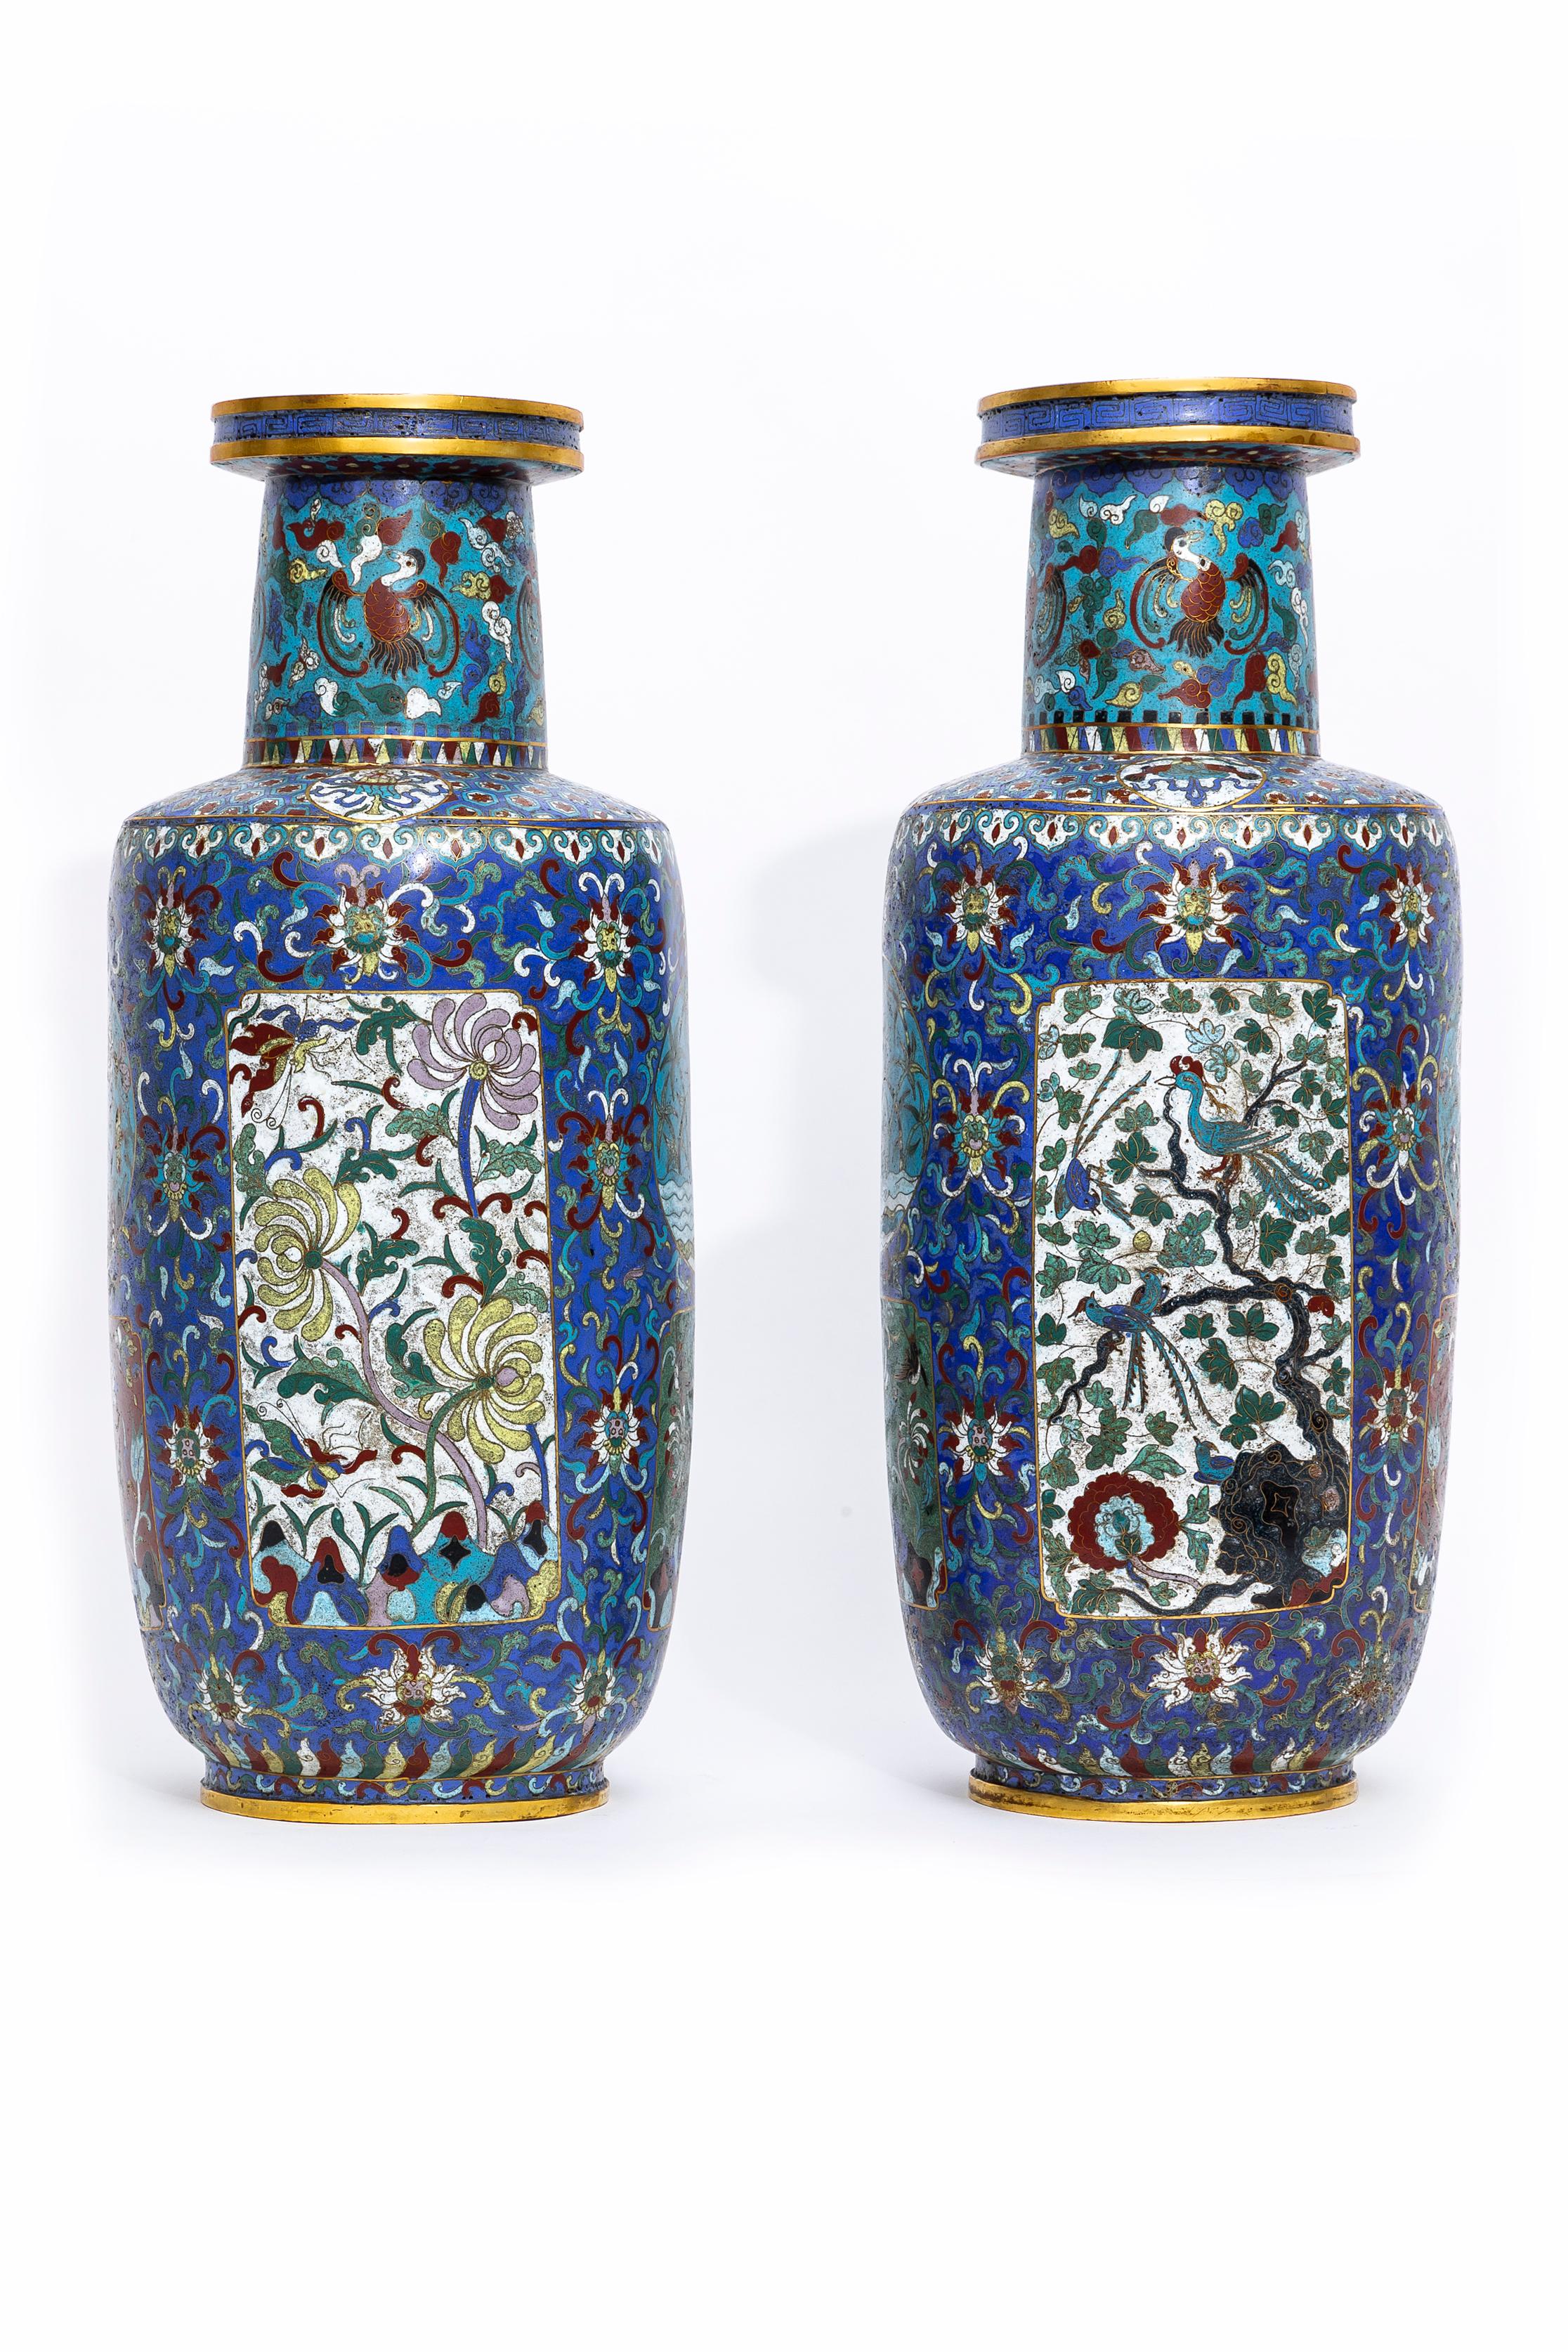 Cloissoné Pair Chinese 19th C. Qing Dynasty, Cloisonne Multi-Cartouche Vases from Museum For Sale